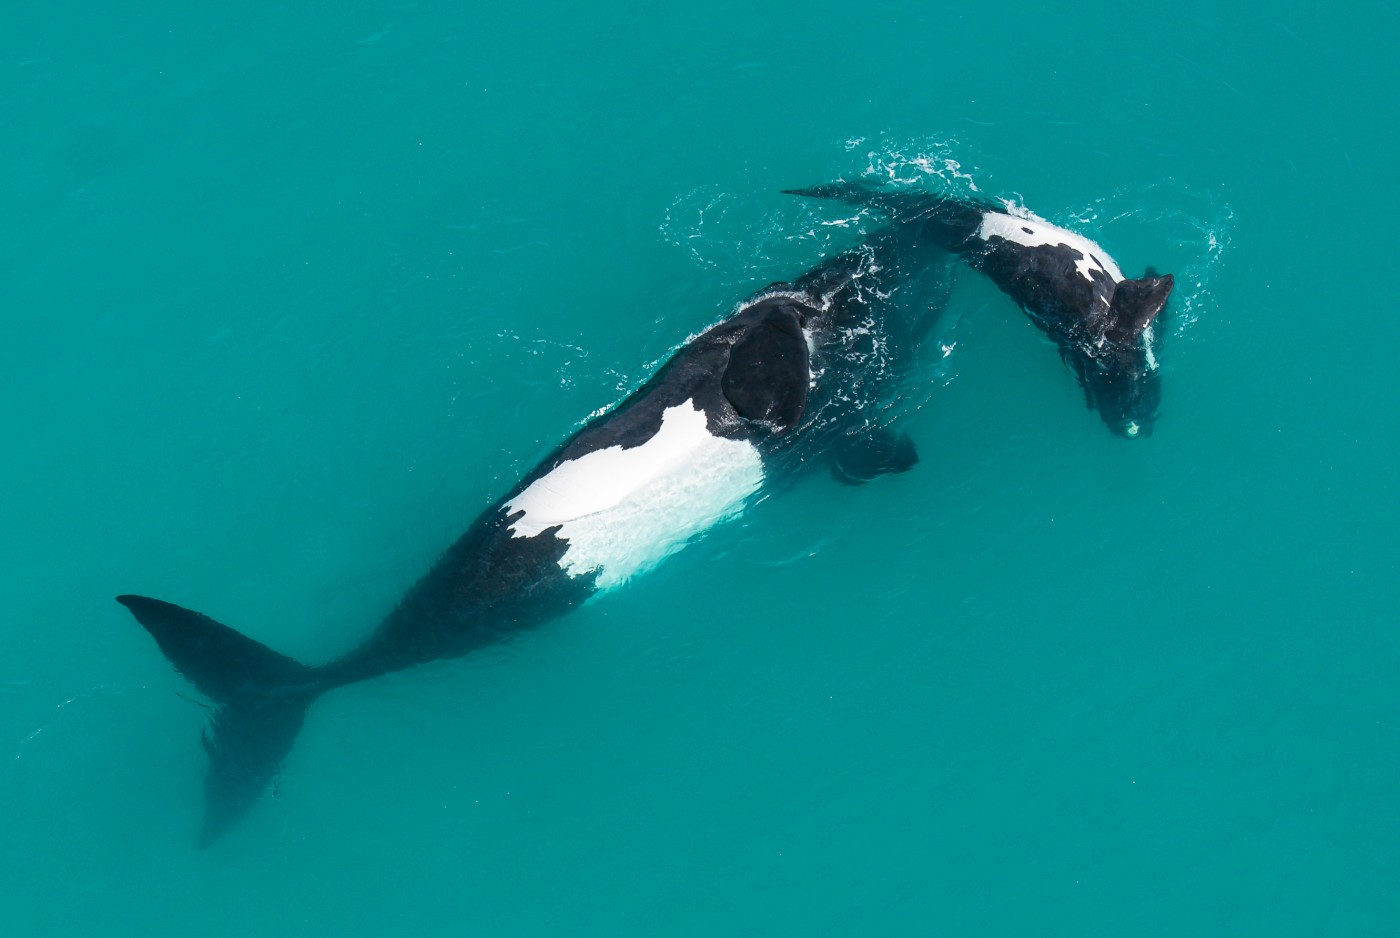 A mother and calf Southern Right Whale (Eubalaena australis) roll on their backs in a shletered bay.